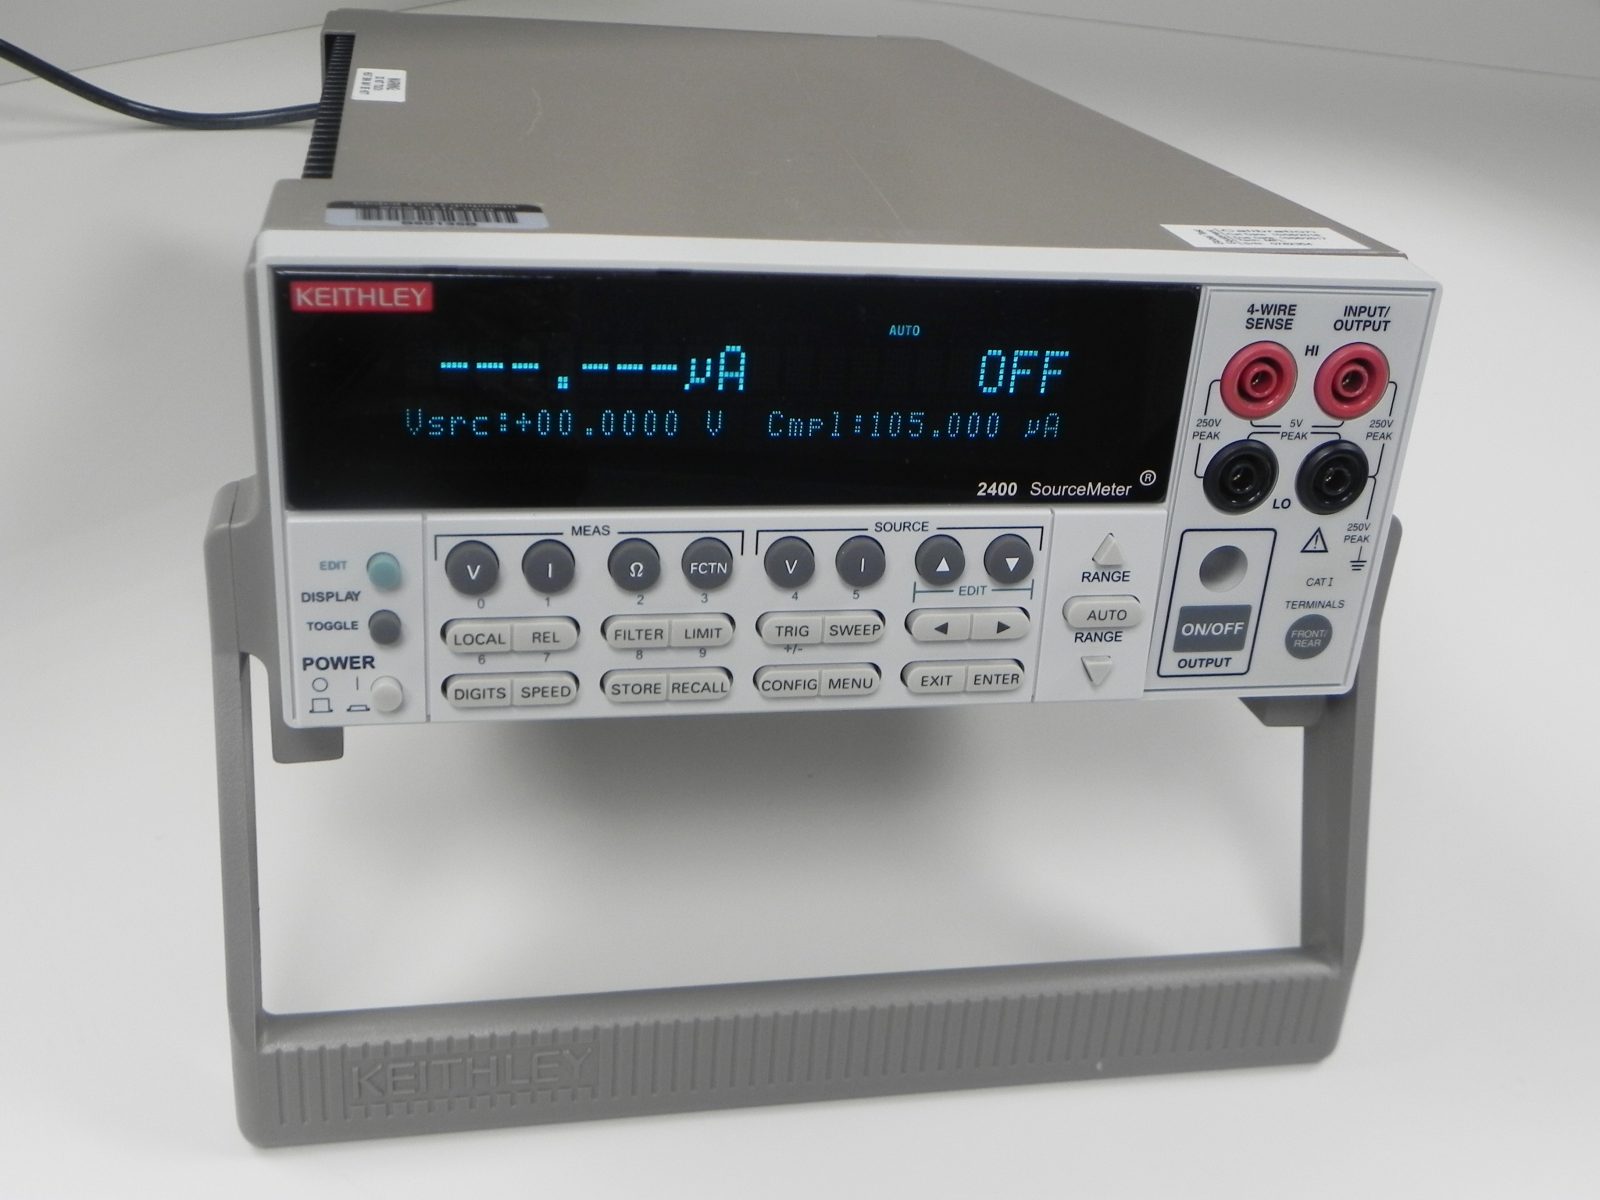 NEW Keithley Model 2400 General Purpose SourceMeter – Calibrated